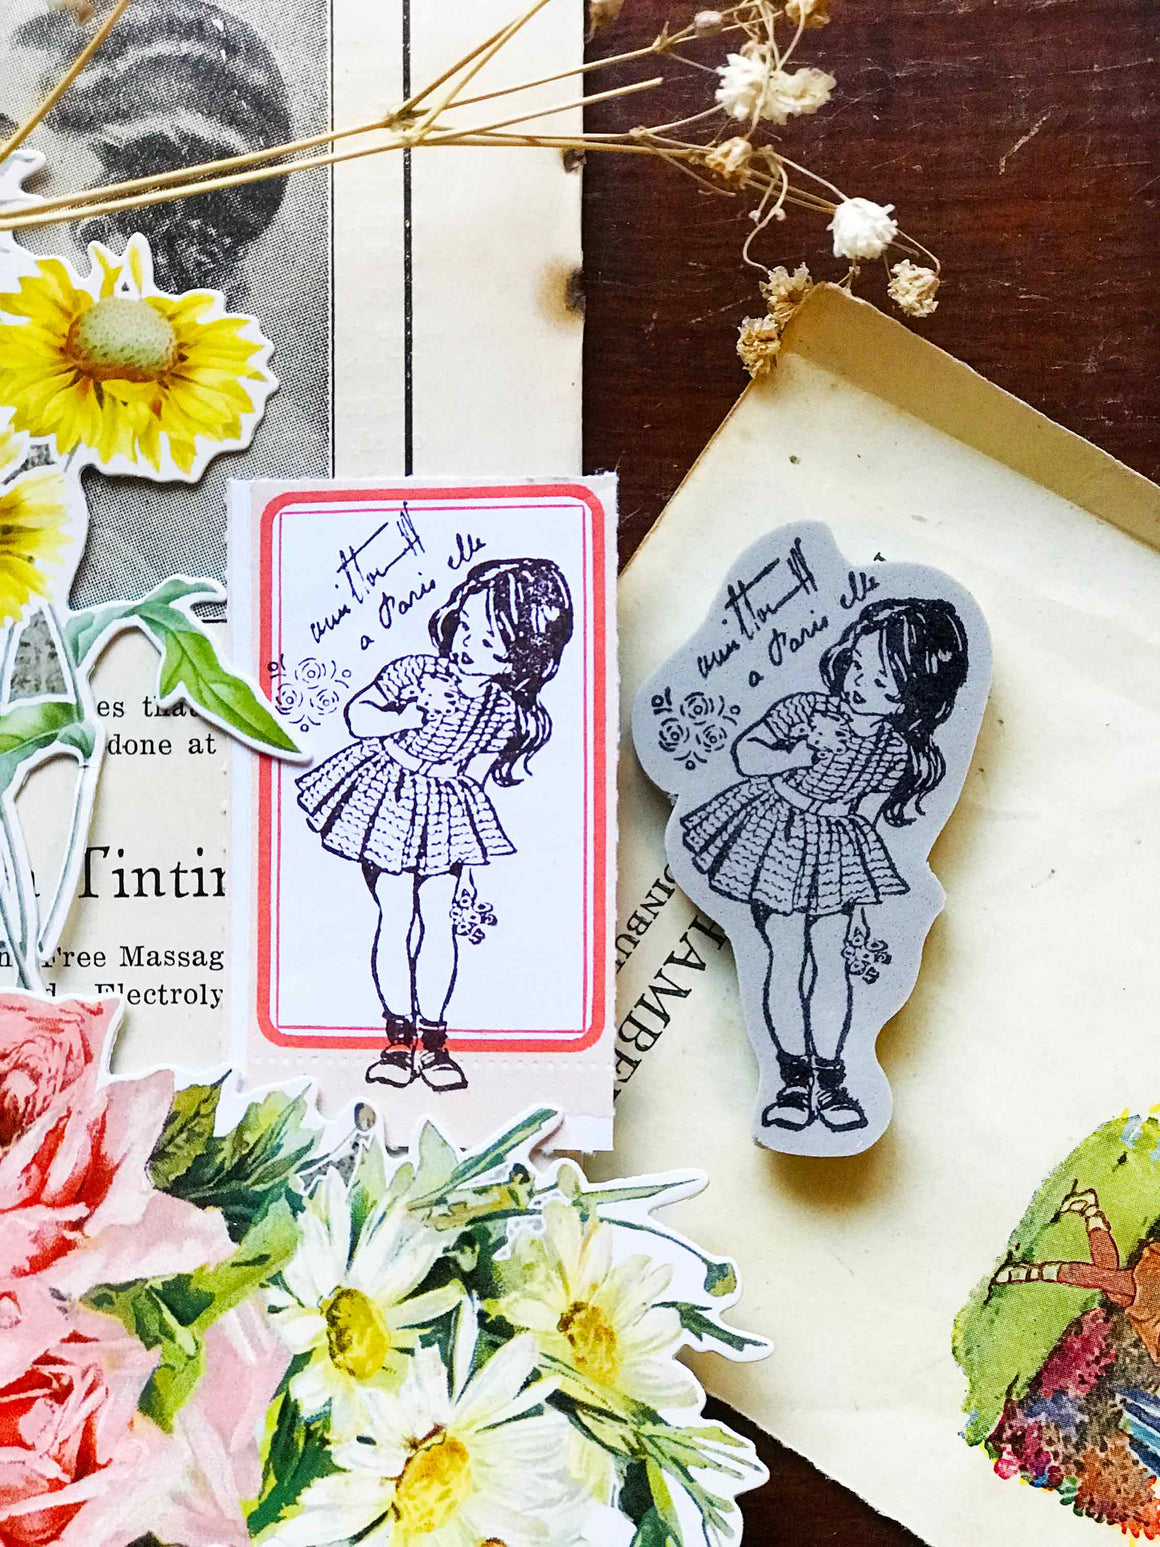 Paris Elle’ (flower girl series) Rubber Stamp by Mic Moc (花束の女の子) from micmoc.com